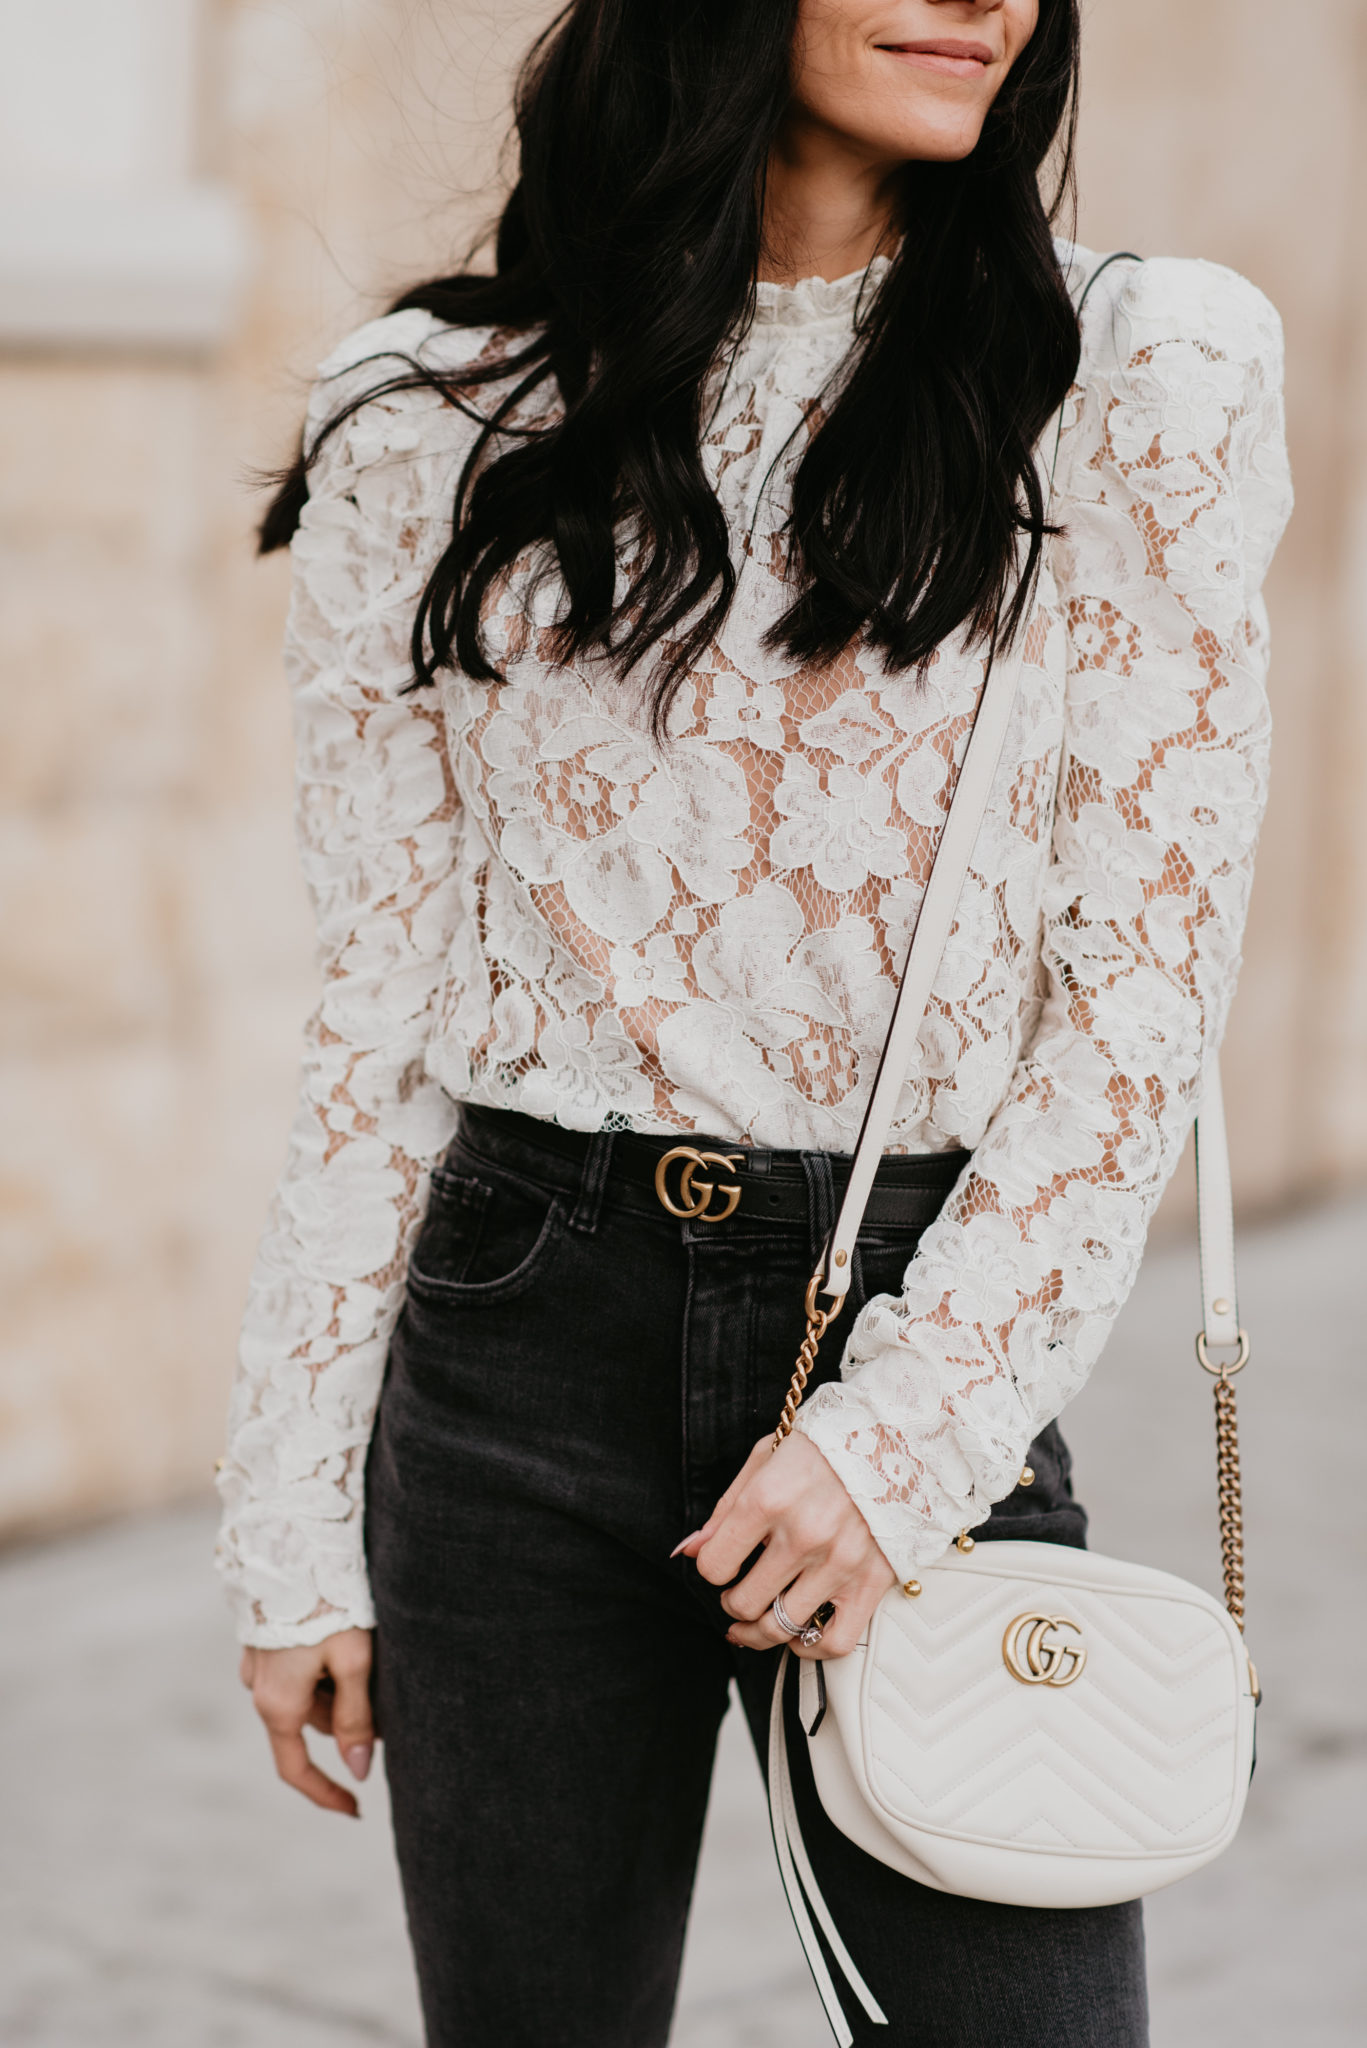 Cute white lace top styled for Spring for top US fashion blog, Outfits & Outings: image of a woman wearing a WAYF white lace top, DL1961 cropped flared jeans, Gucci double g leather belt, Gucci marmot bag and Charles David toe pumps